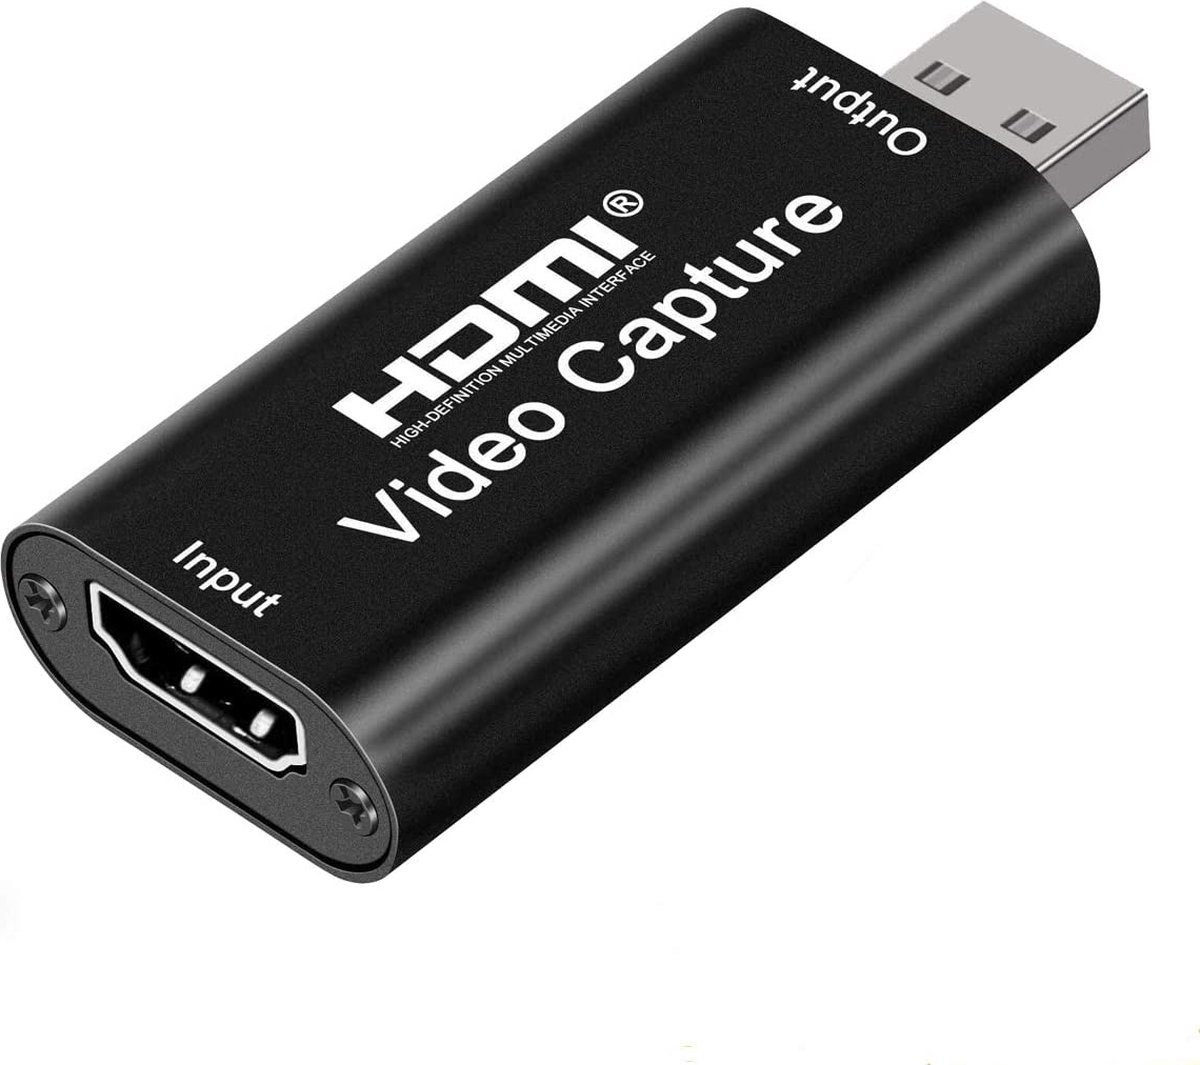 HDMI Capture Card, HD 1080P HDMI USB Version, Capture Card for Live Stream, Game Recording, Video Conferencing, for DSLR Camcorder Phones Consoles